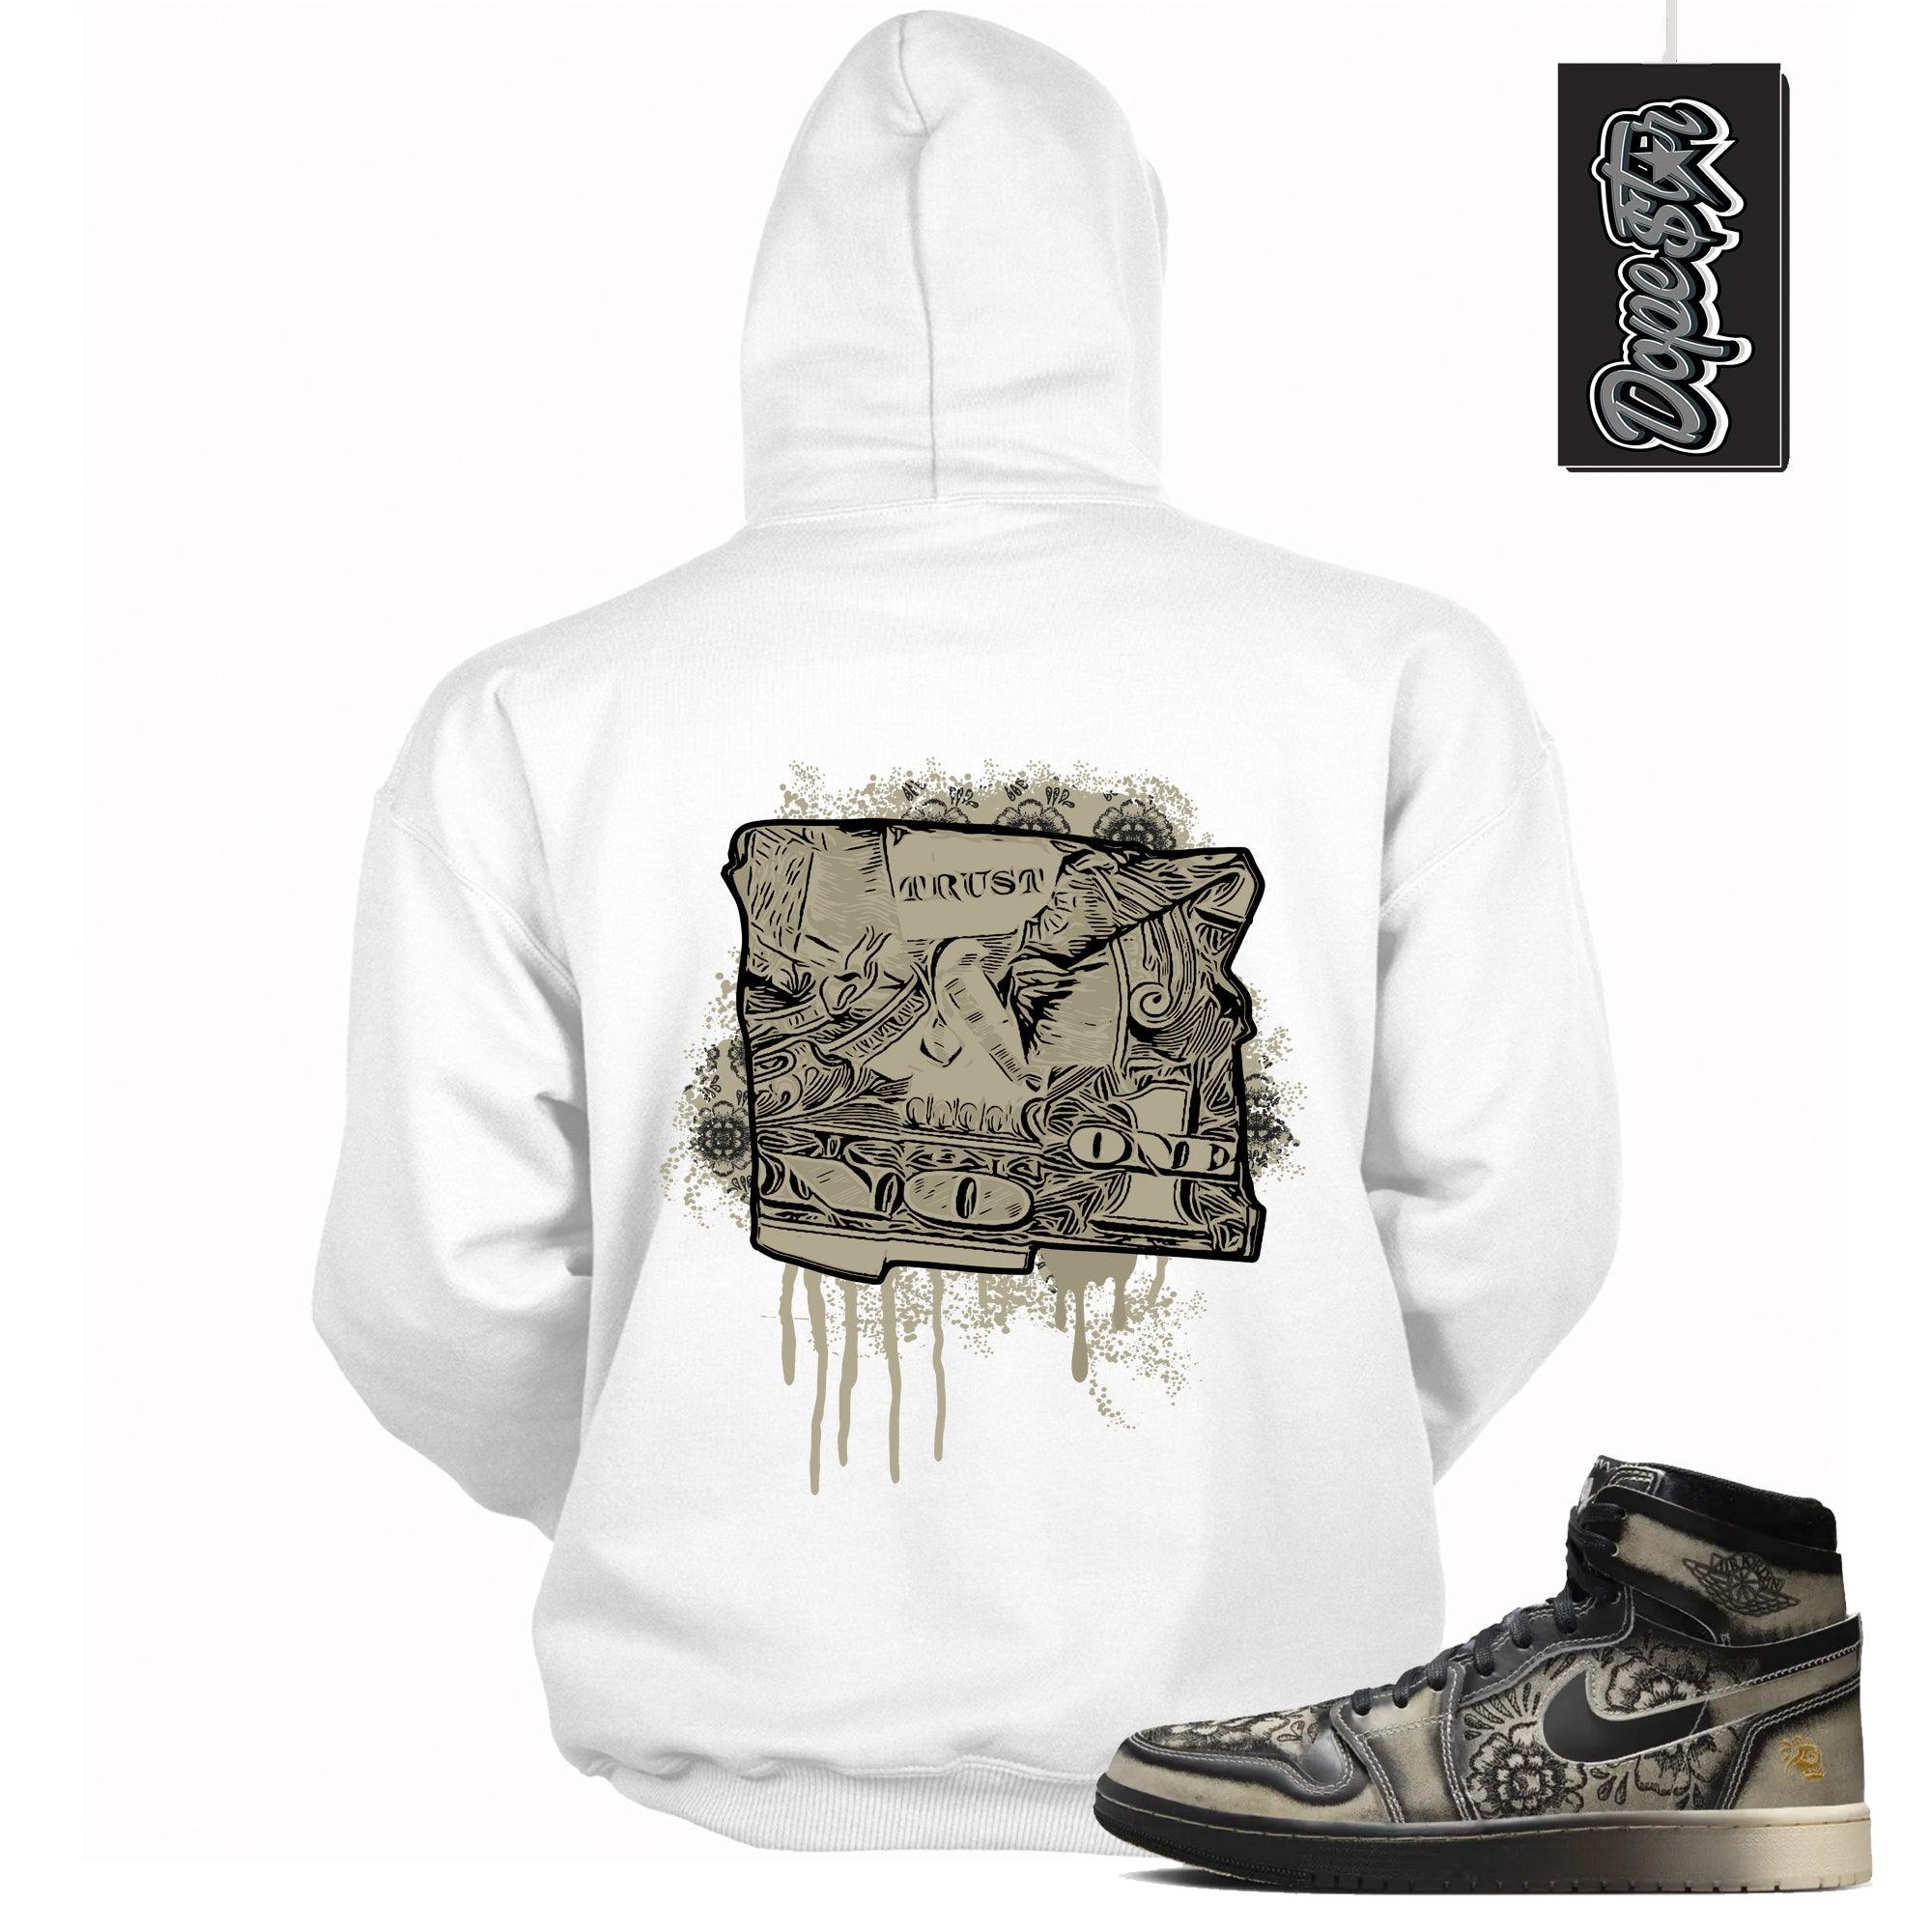 Cool White Graphic Hoodie with “ Trust No One Dollar “ print, that perfectly matches Air Jordan 1 High Zoom Comfort 2 Dia de Muertos Black and Pale Ivory sneakers